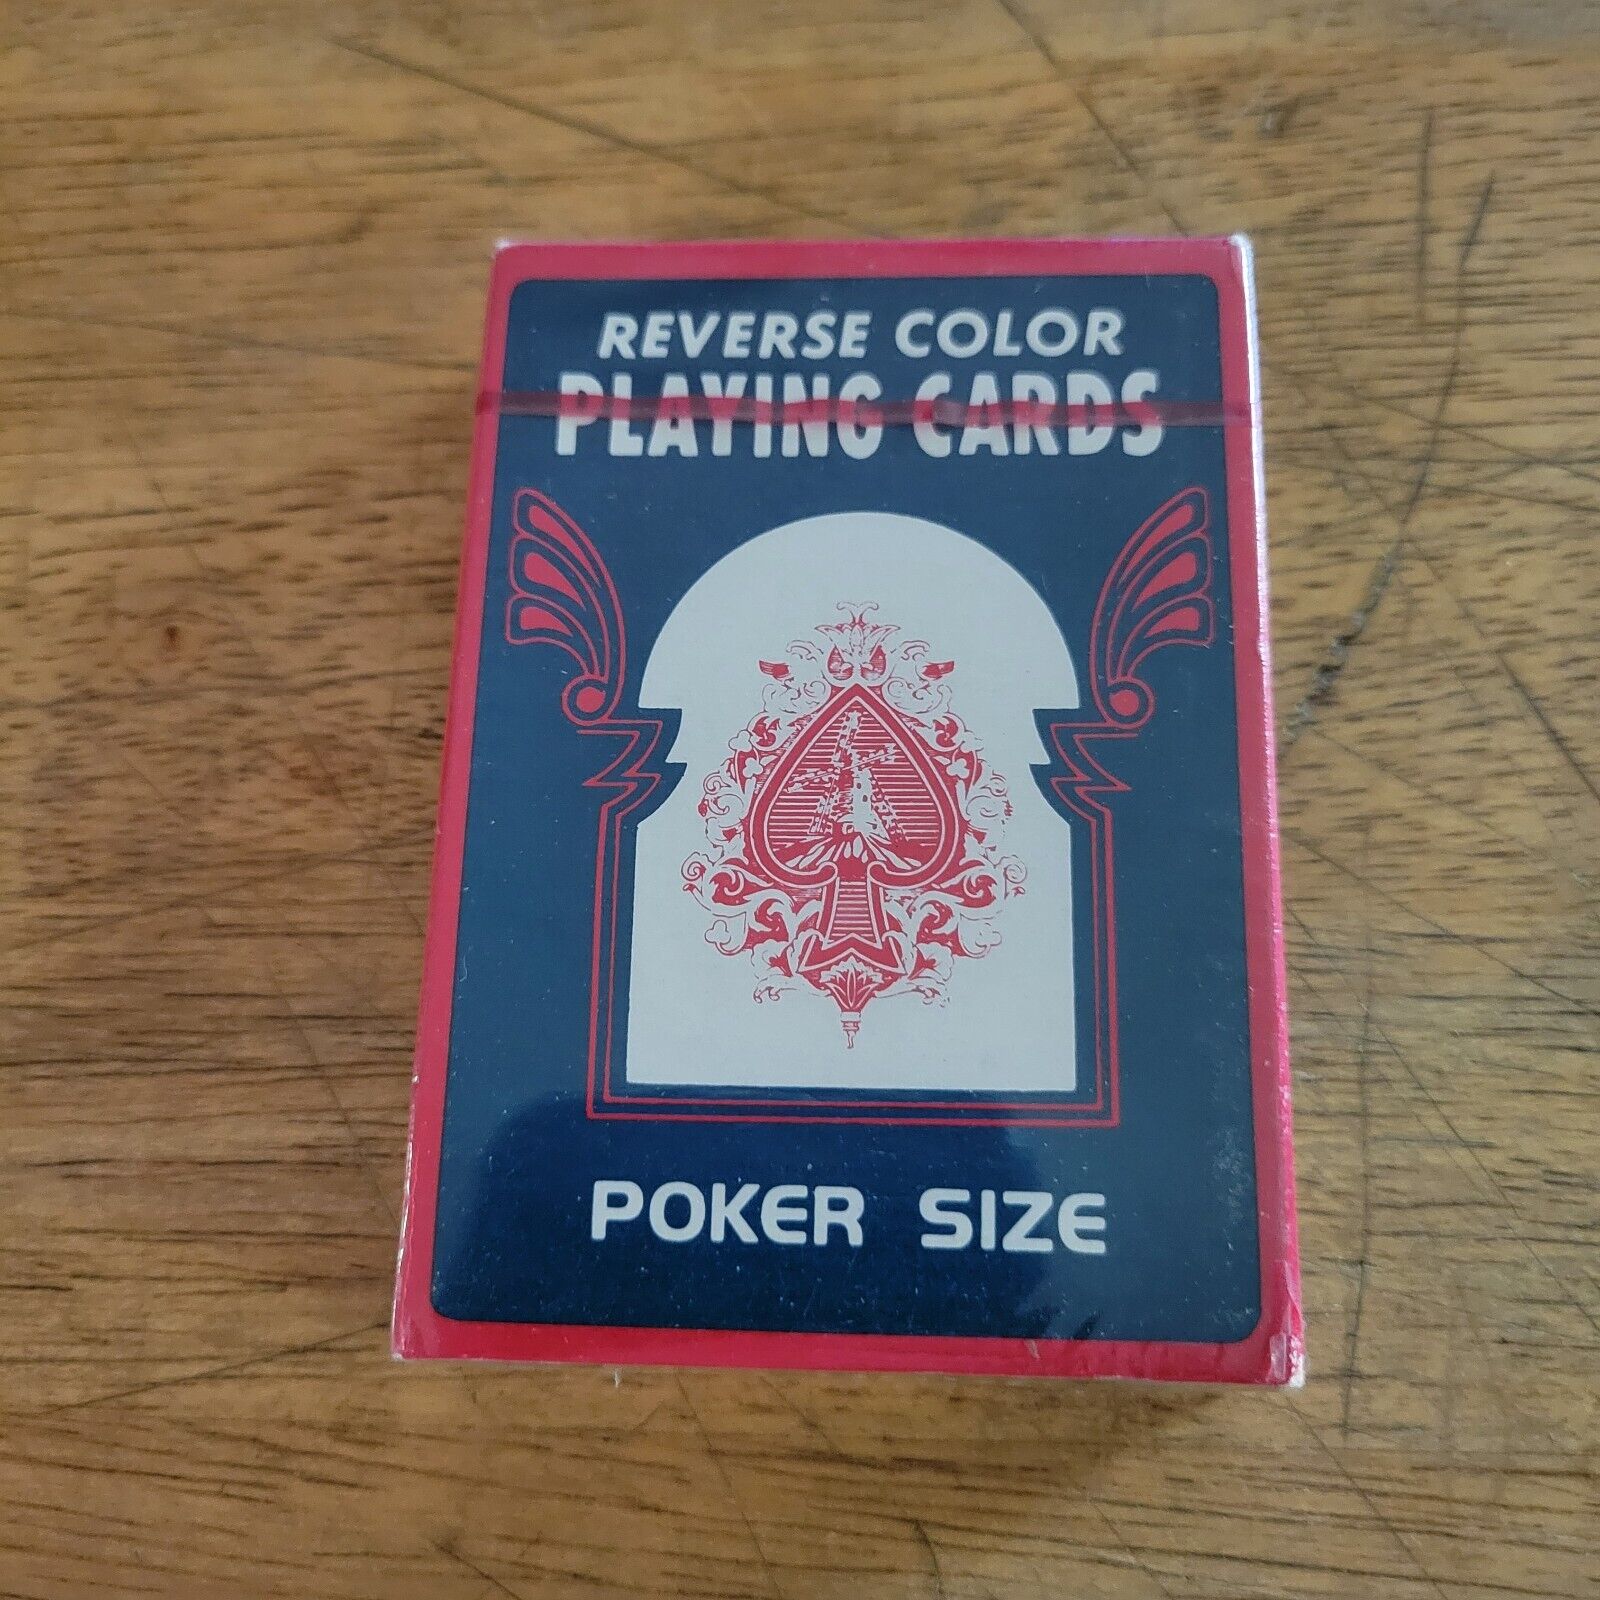 VINTAGE REVERSE COLOR NO. 9696 PLAYING CARDS POKER SIZE DECK SEALED HONG KONG